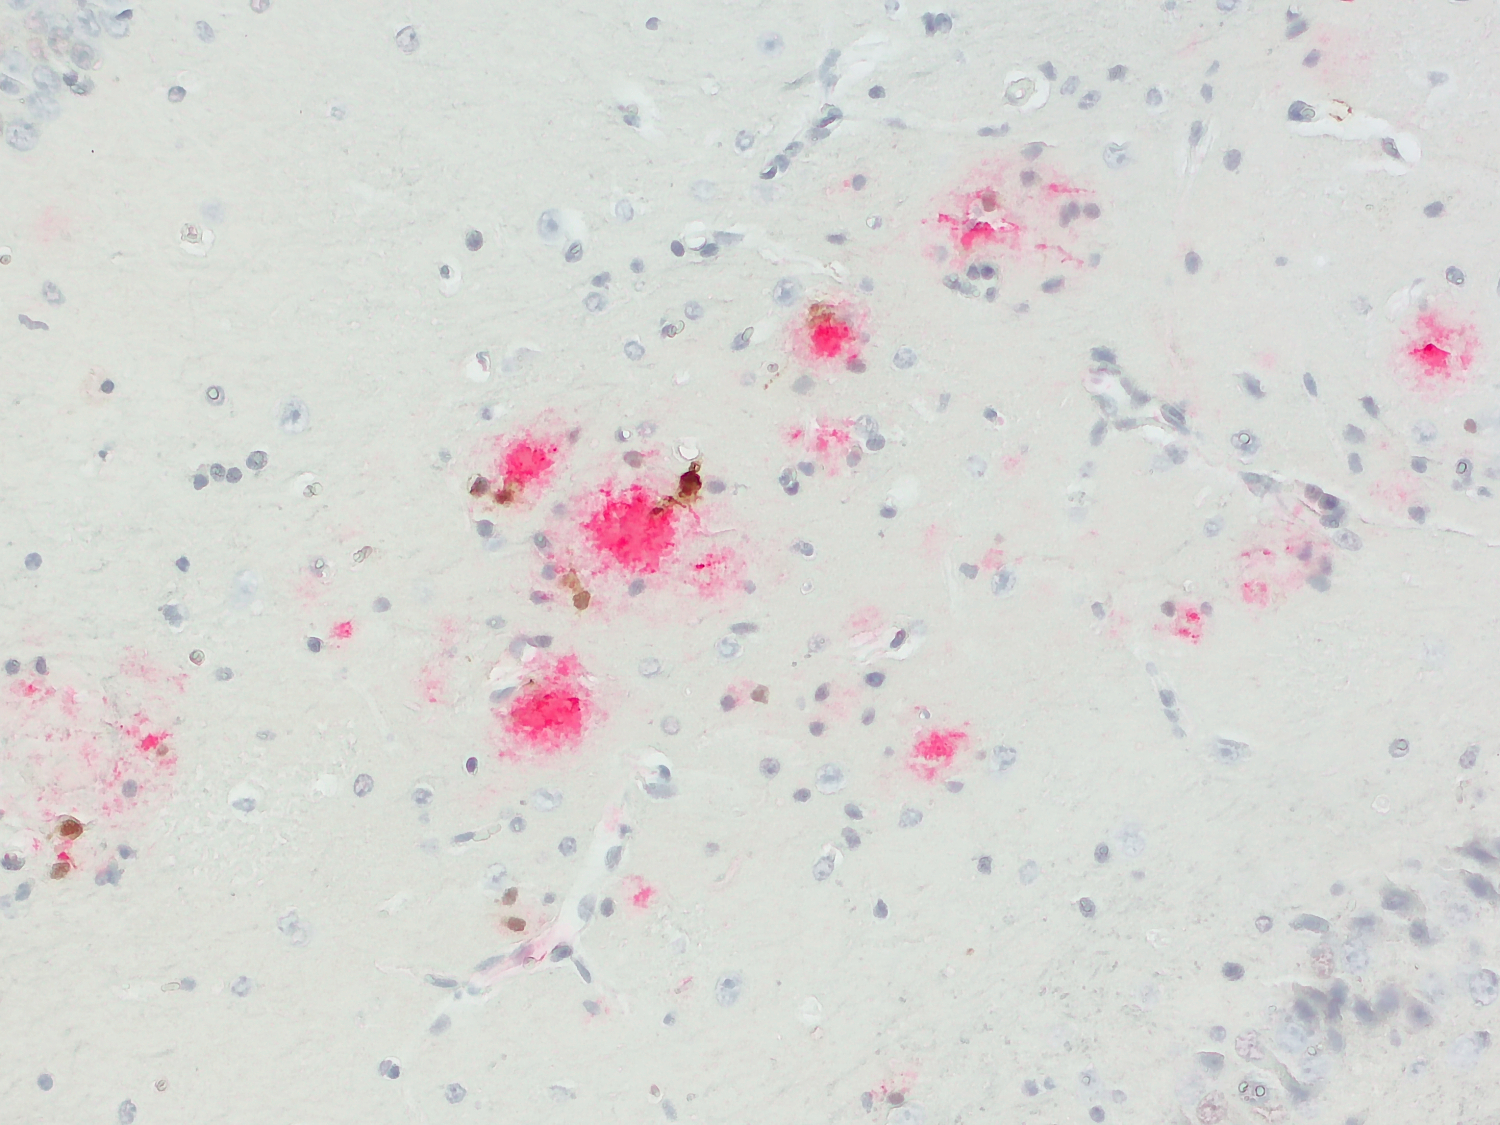  Chromogenic double-staining of Galectin-3 (brown) and Abeta (AP-RED; red) in a mouse model of Alzheimer’s disease